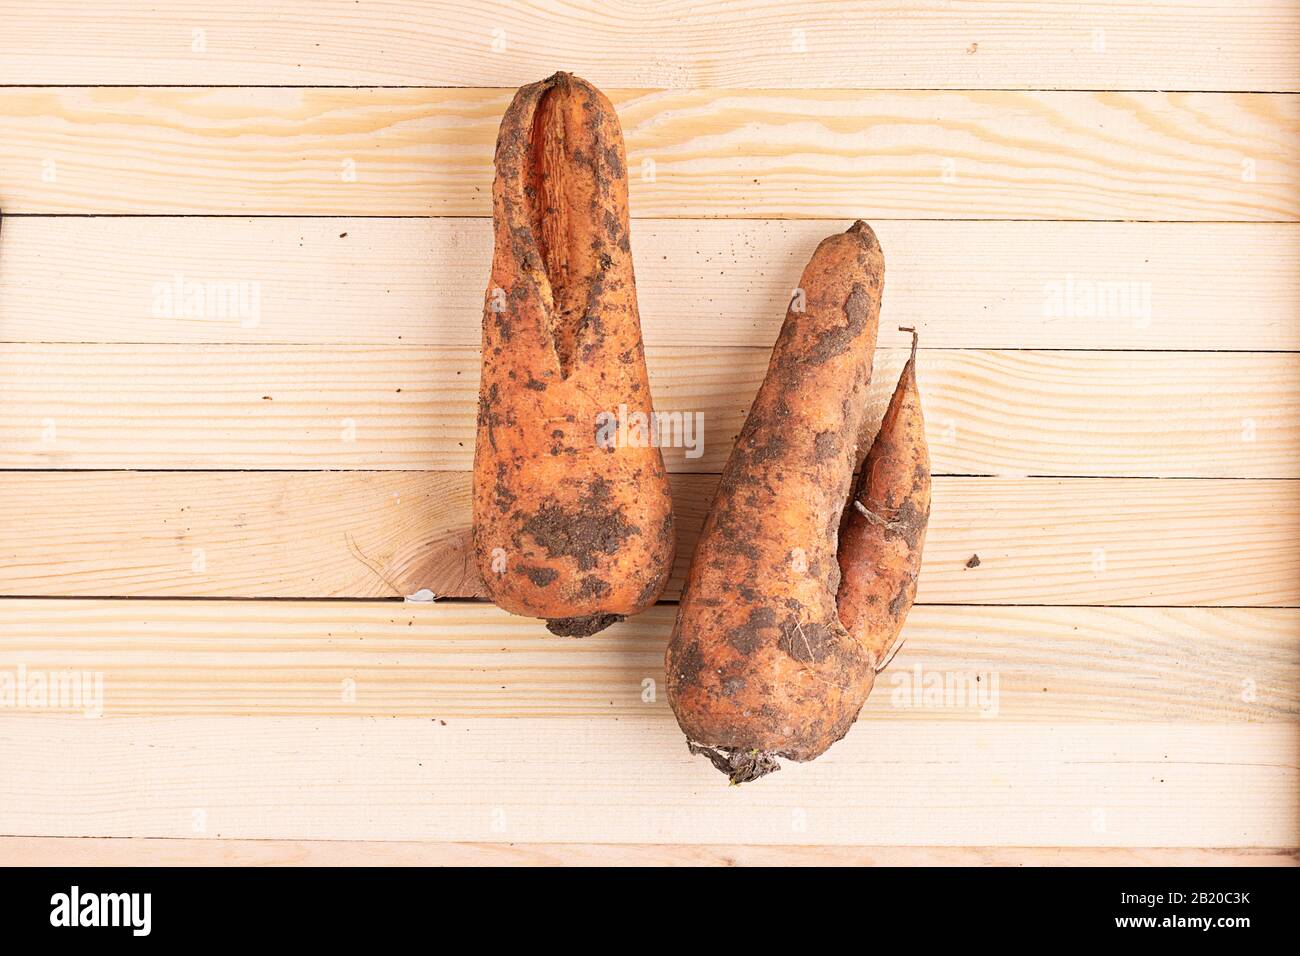 Ugly carrots on wooden table, top view Stock Photo